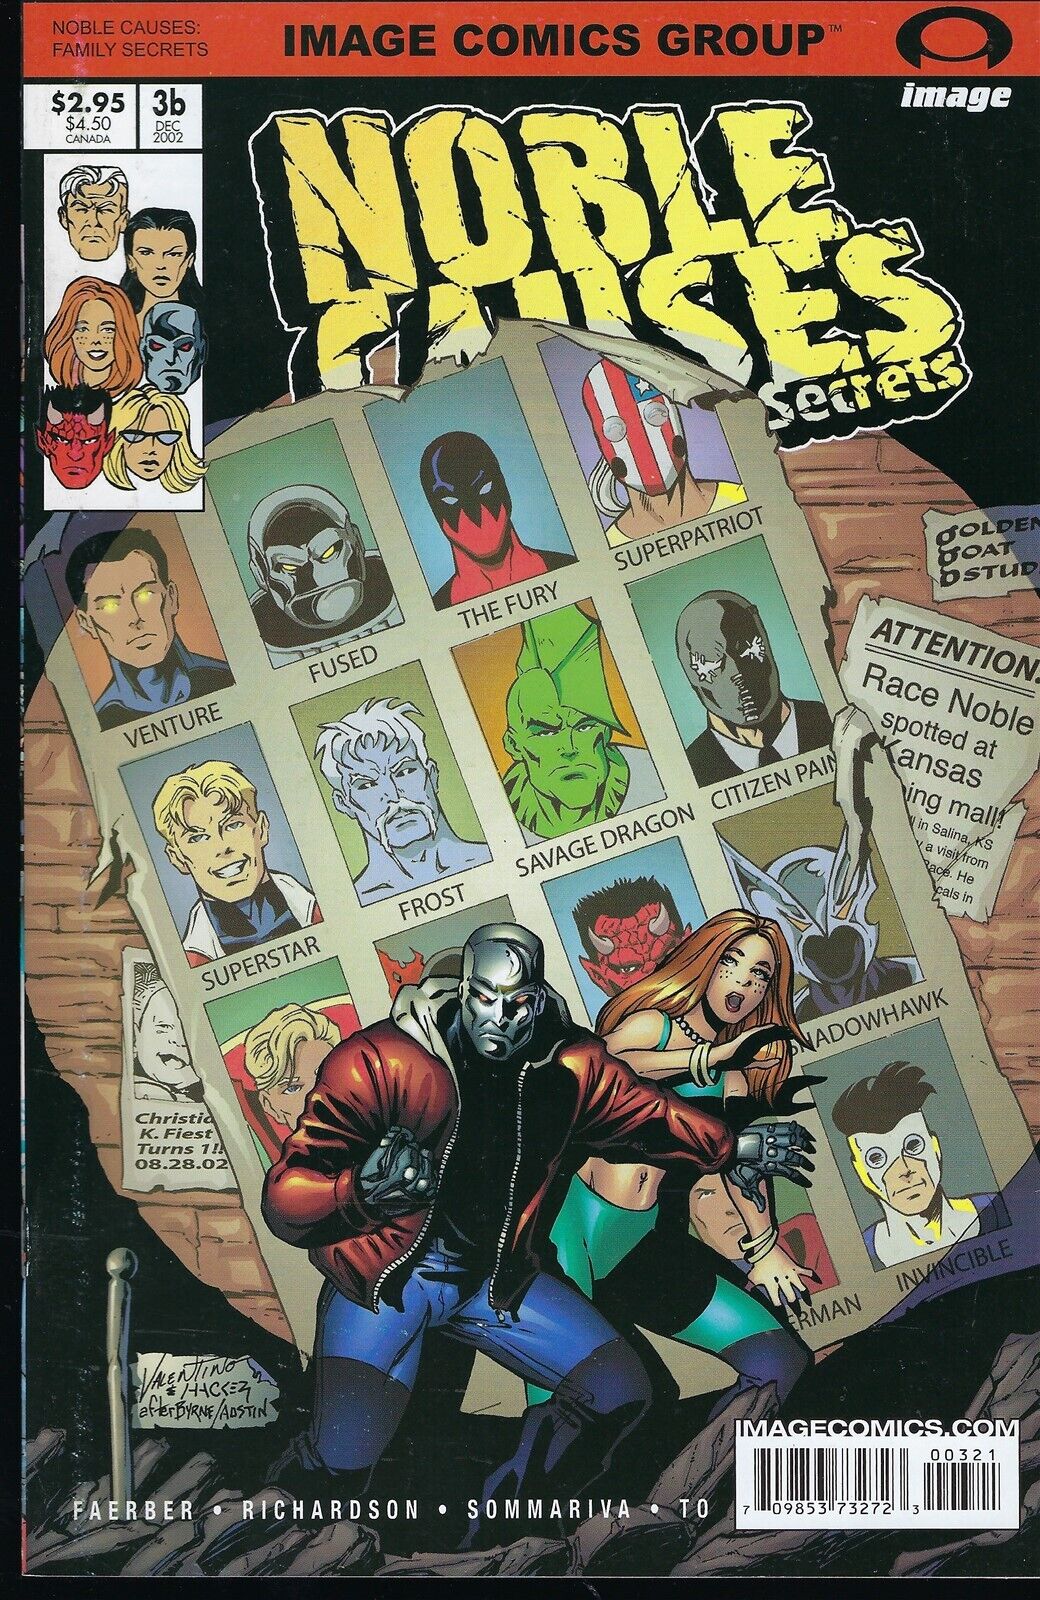 Noble Causes Family Secrets(Image-2002) #3b - Homage Cover (8.0)